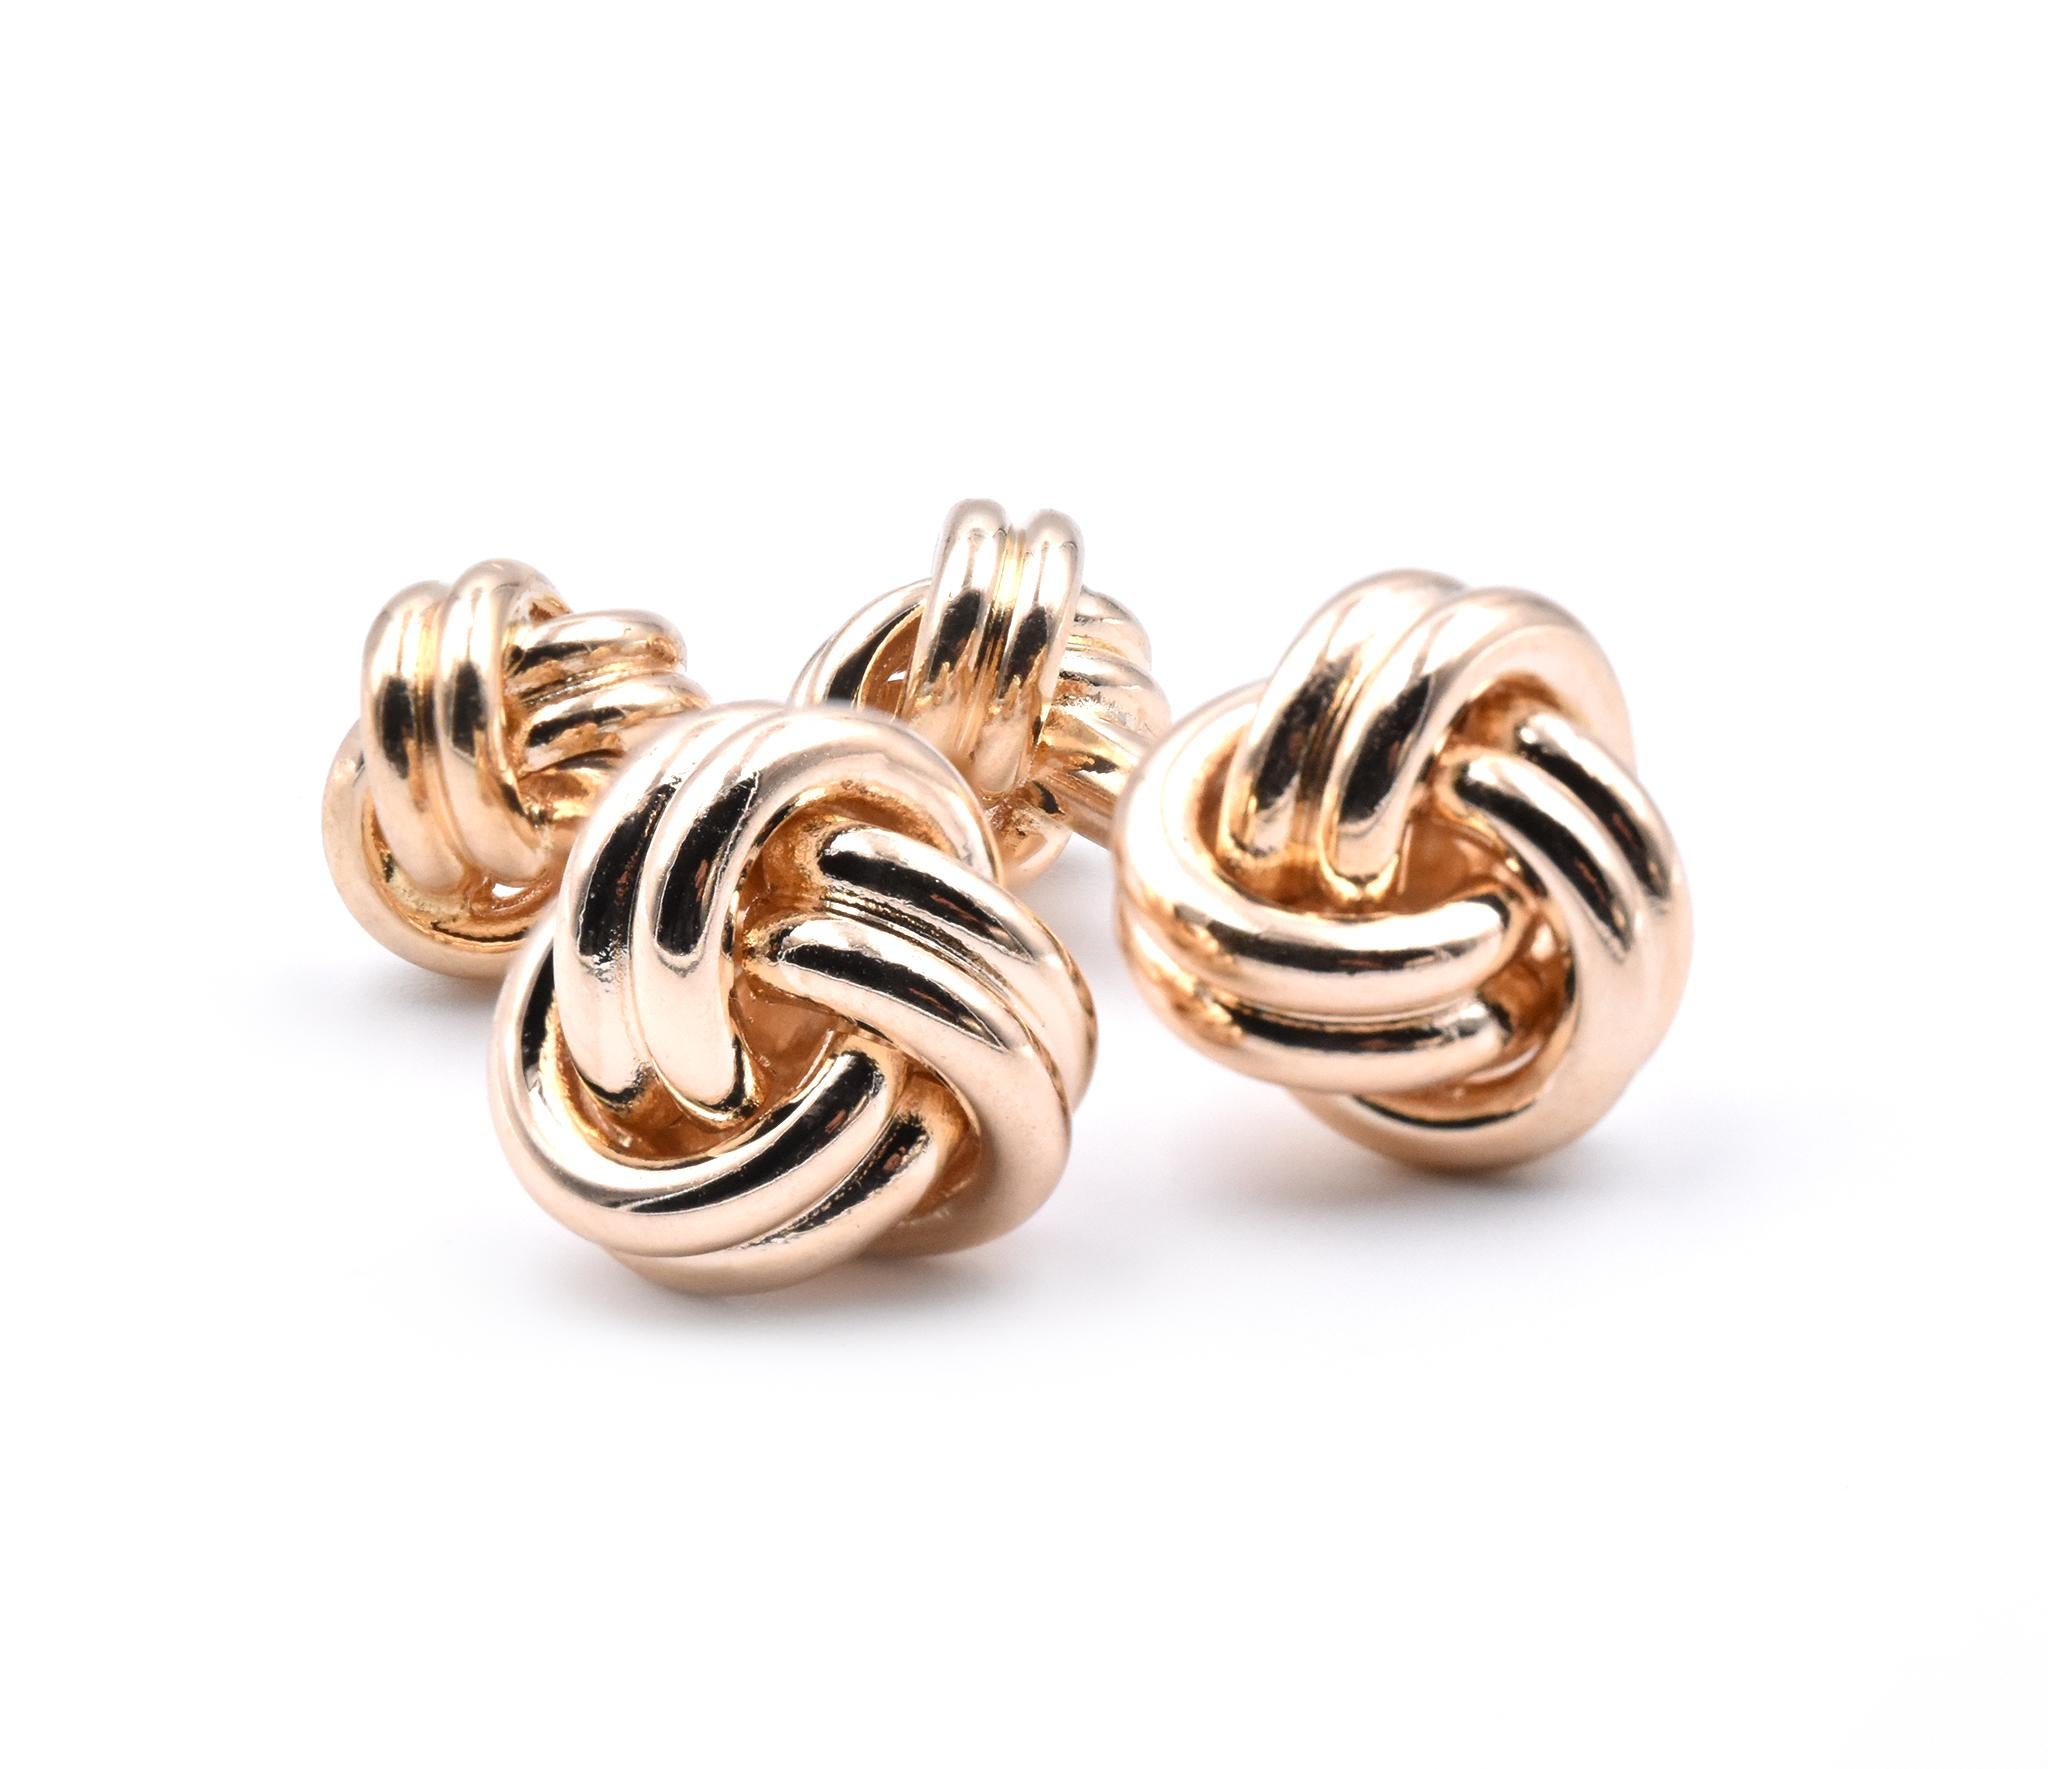 Designer: Tiffany & Co.
Material: 14K yellow gold
Dimensions: cufflinks measure 13mm wide
Weight: 20.49 grams